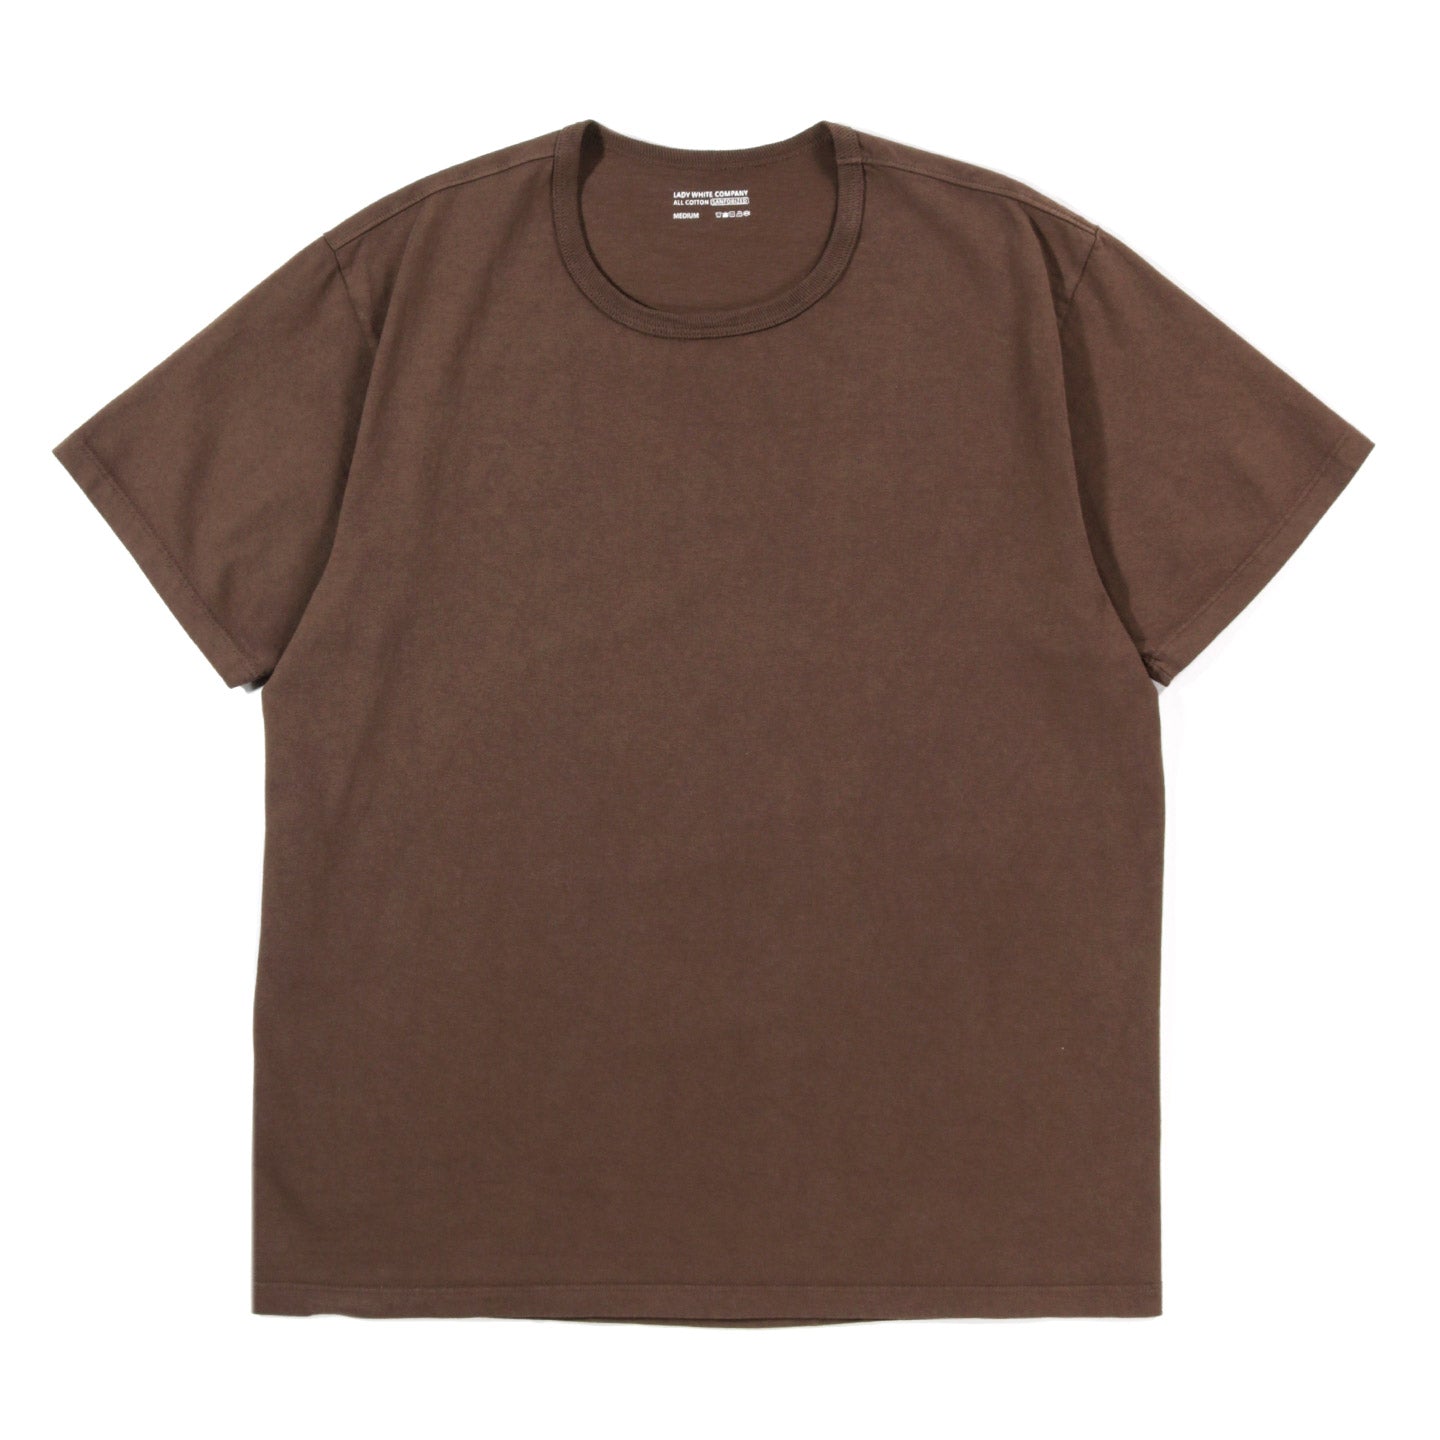 LADY WHITE CO. T-SHIRT DARK TAUPE